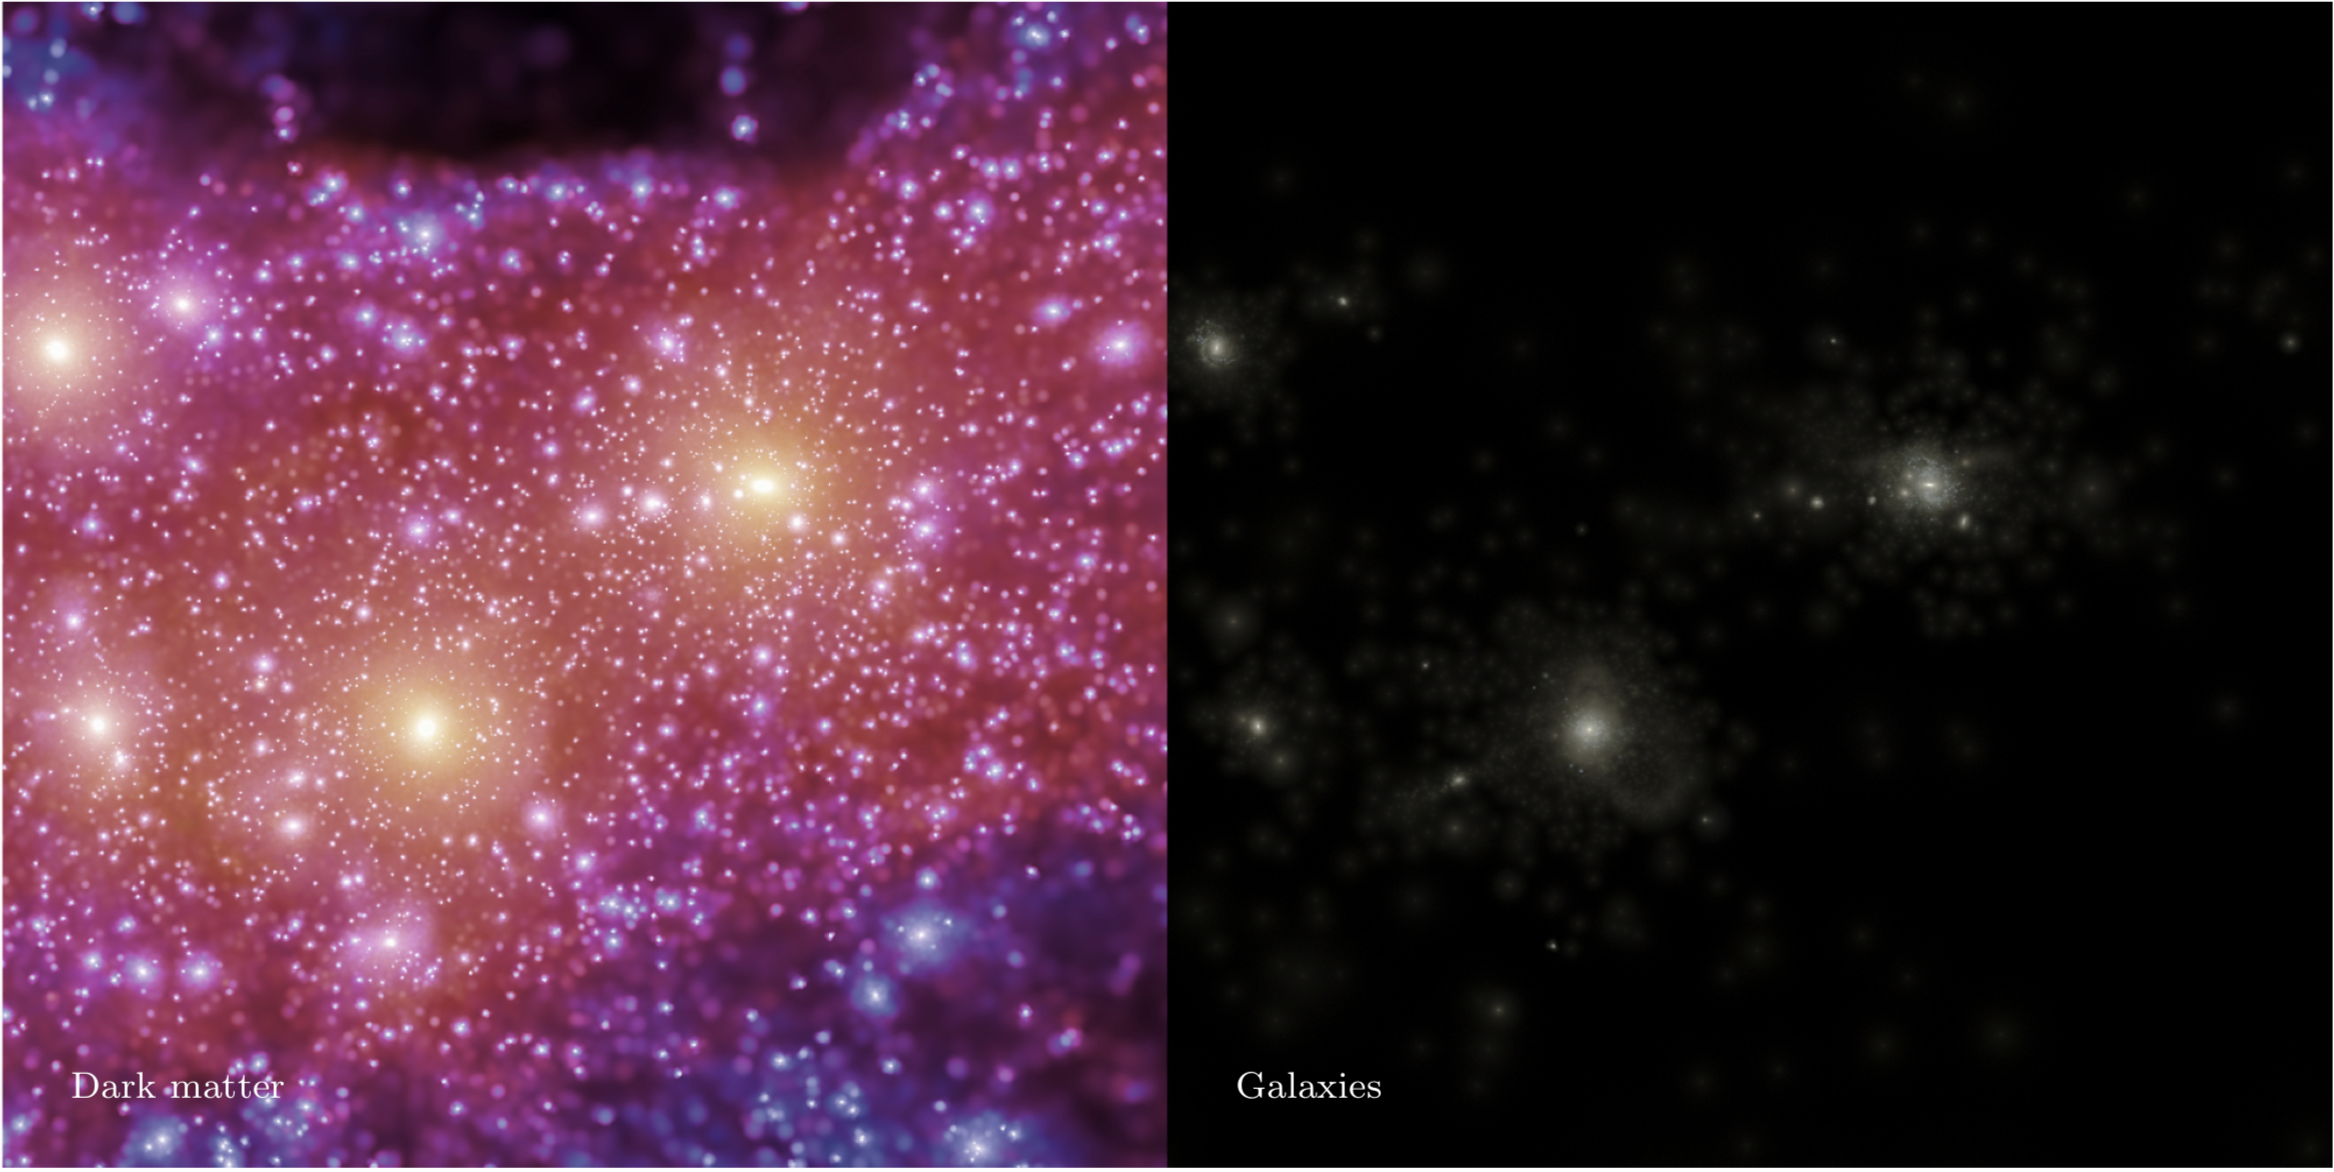 dark matter substructures with the stellar light